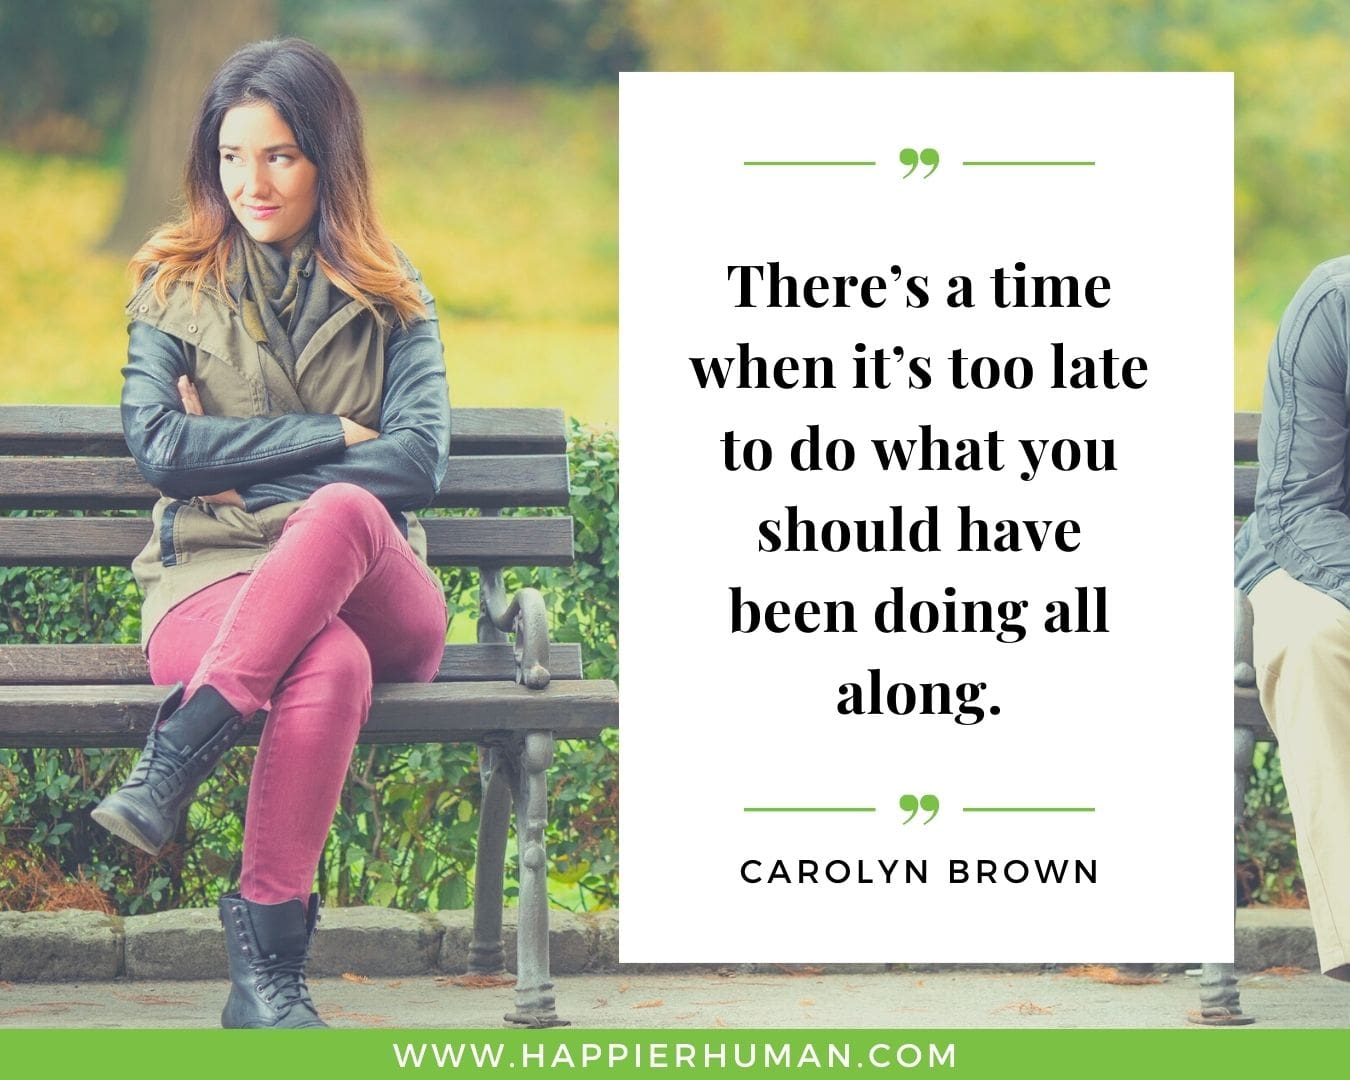 Broken Trust Quotes - “There’s a time when it’s too late to do what you should have been doing all along.” - Carolyn Brown